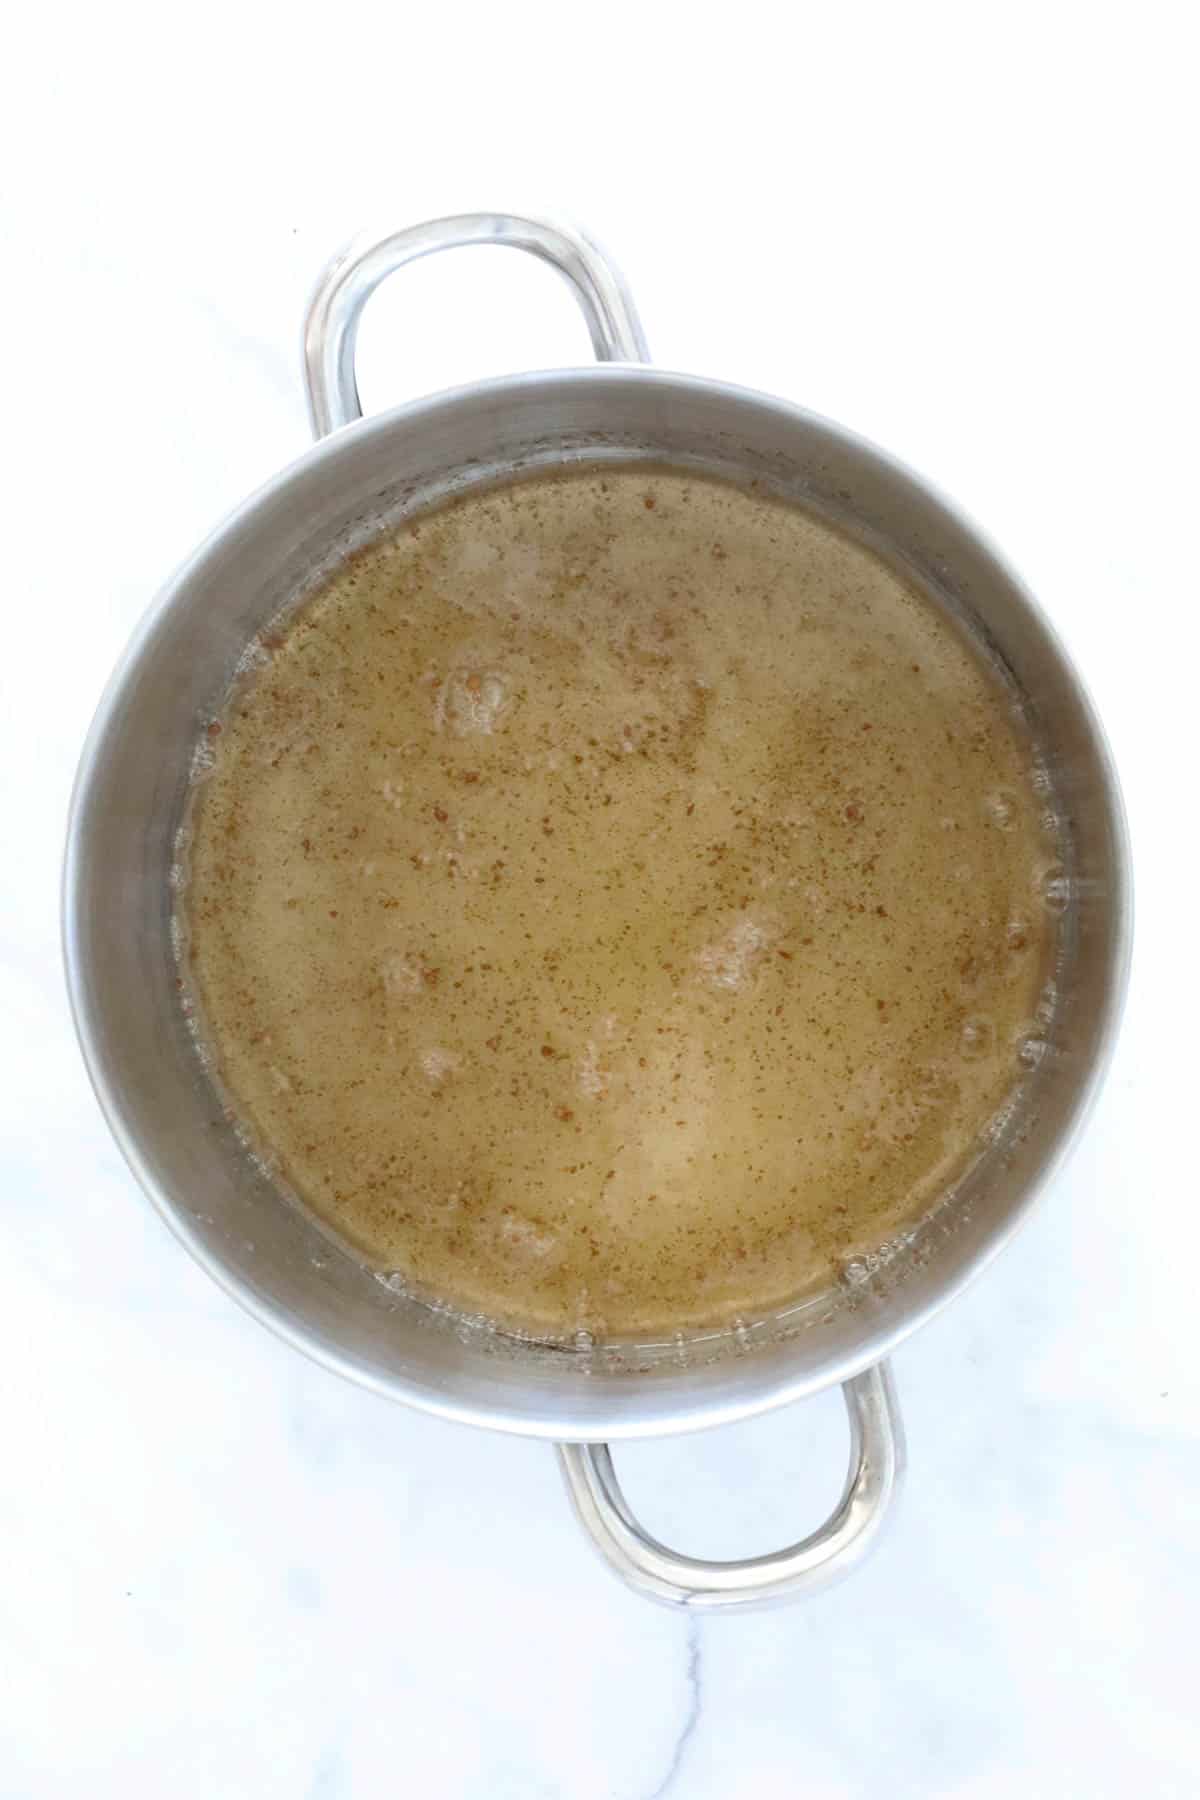 Syrup boiling in a saucepan with lemon juice, cinnamon and sugar.